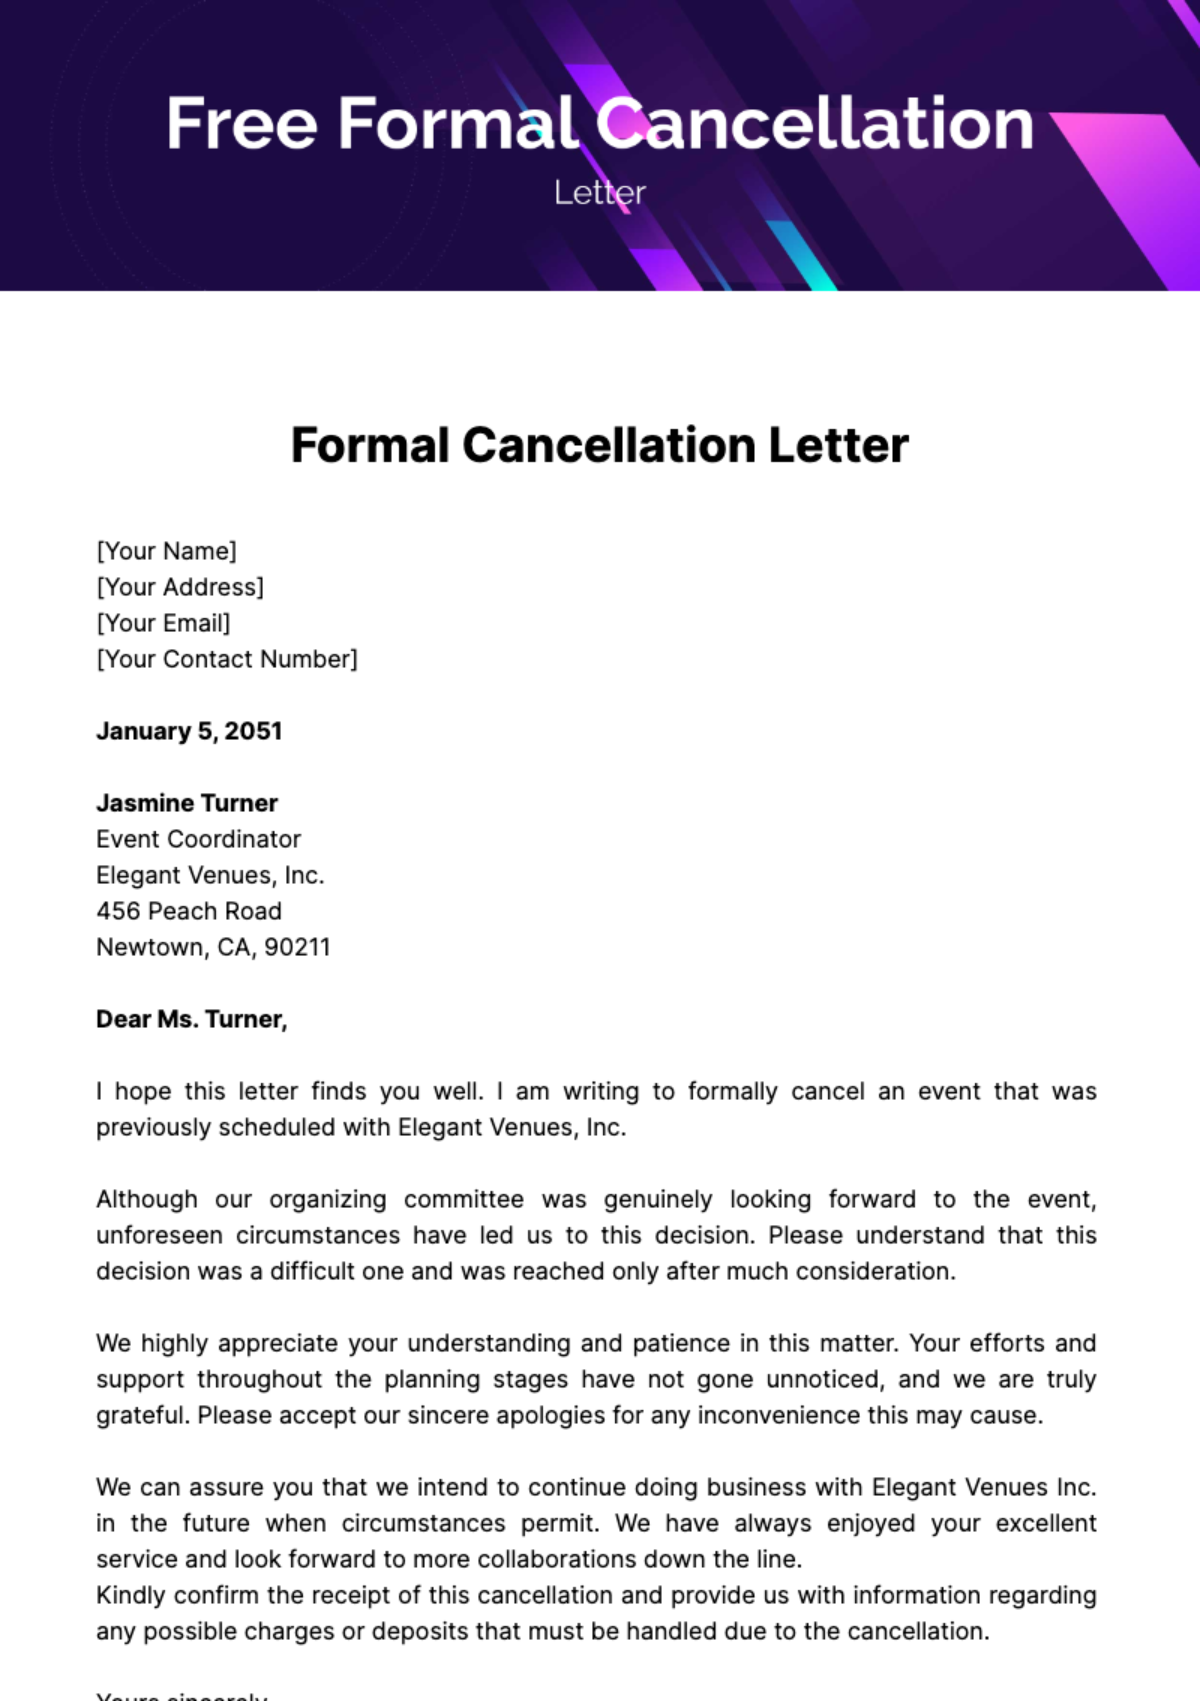 Free Formal Cancellation Letter Template